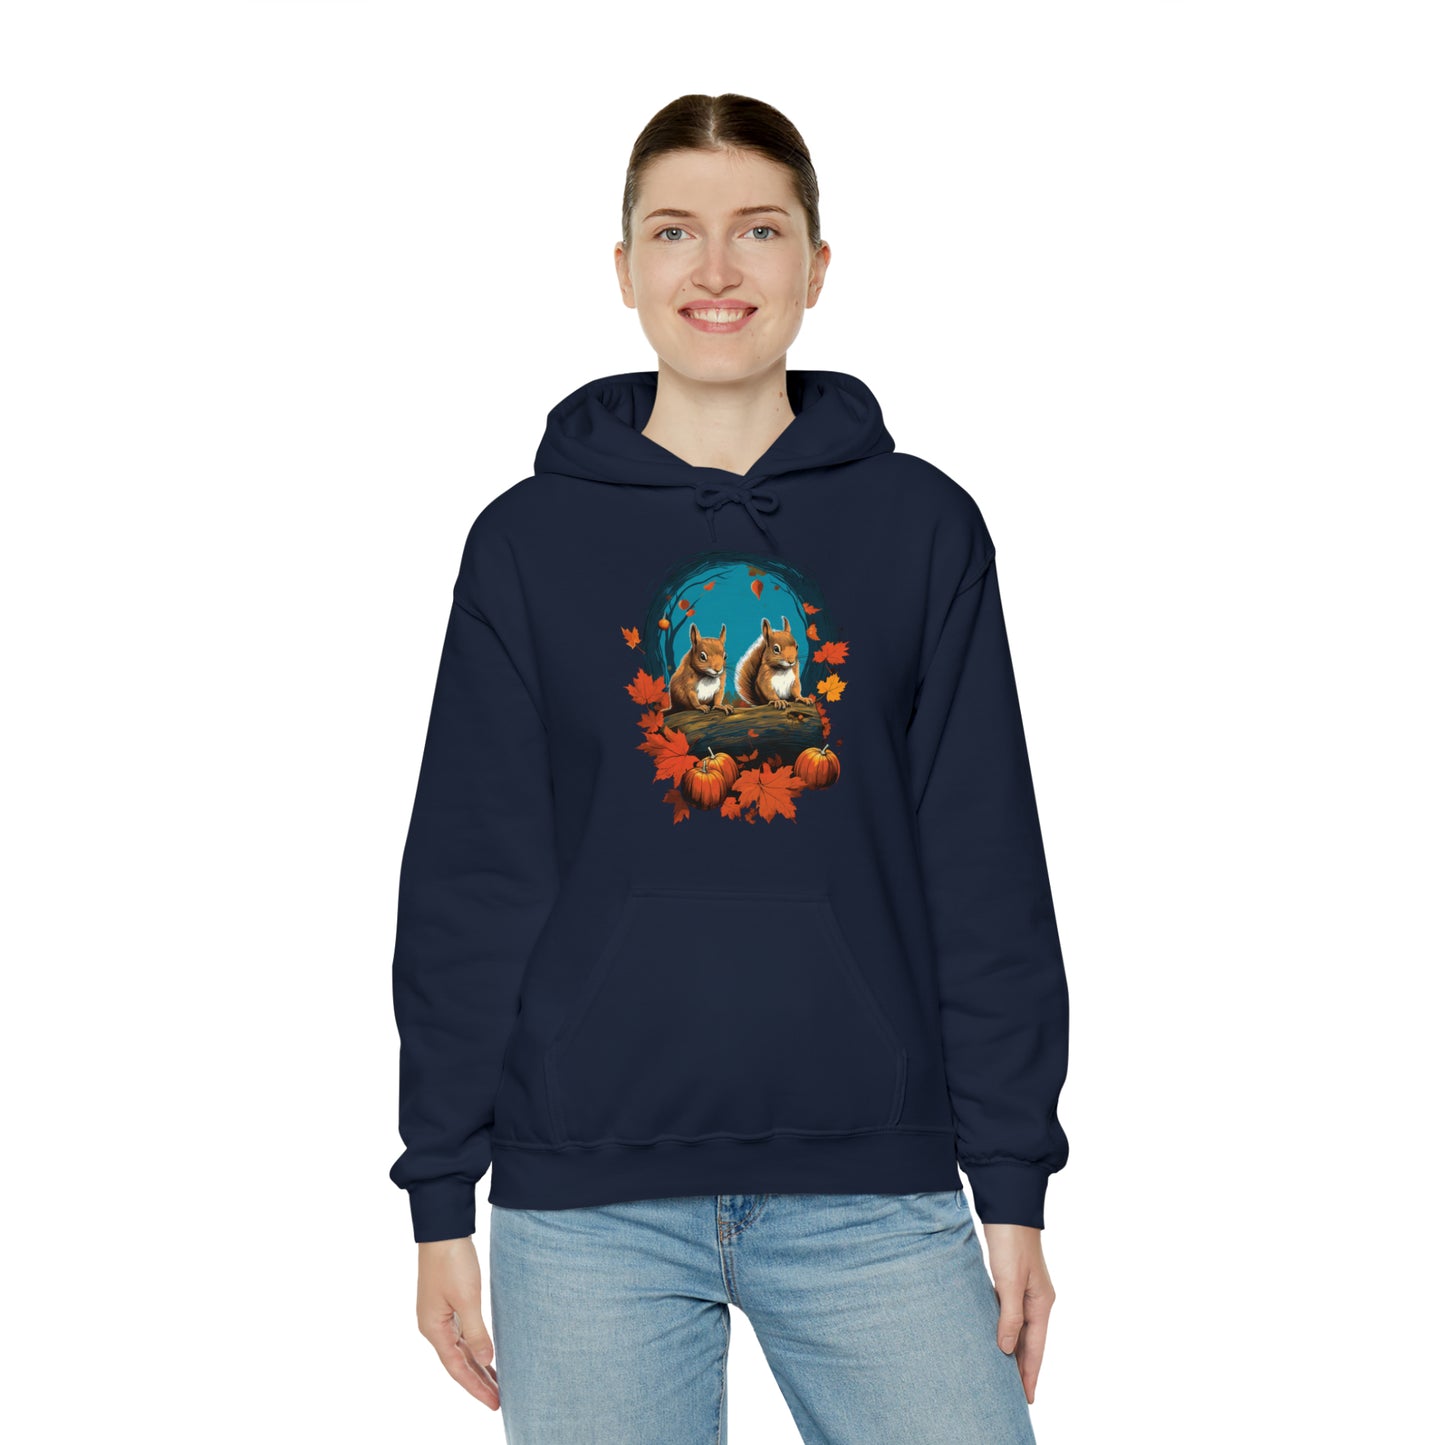 Squirrels Hoodie, Fall Autumn Leaves Pumpkins Animals Pullover Men Women Adult Aesthetic Graphic Cotton Hooded Sweatshirt Pockets Starcove Fashion